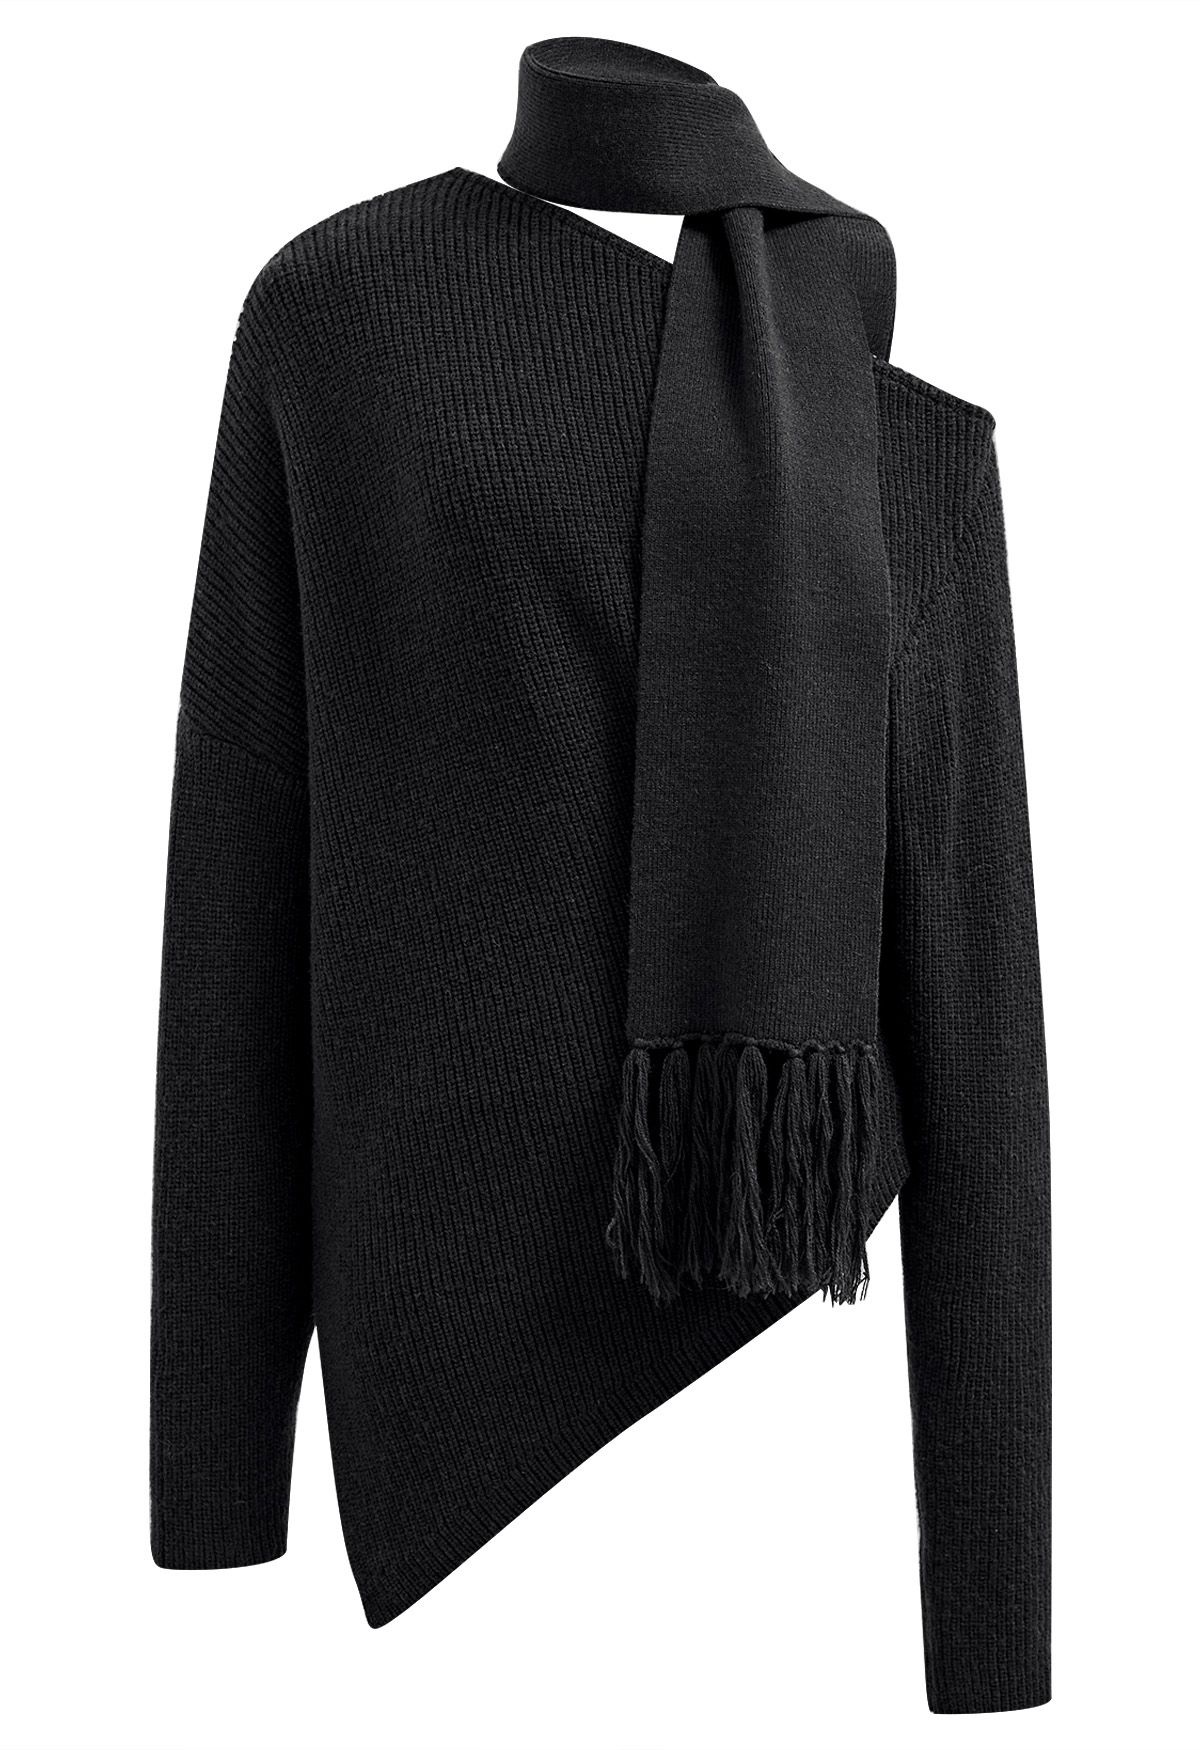 Asymmetric Ribbed Knit Sweater with Tassel Scarf in Black